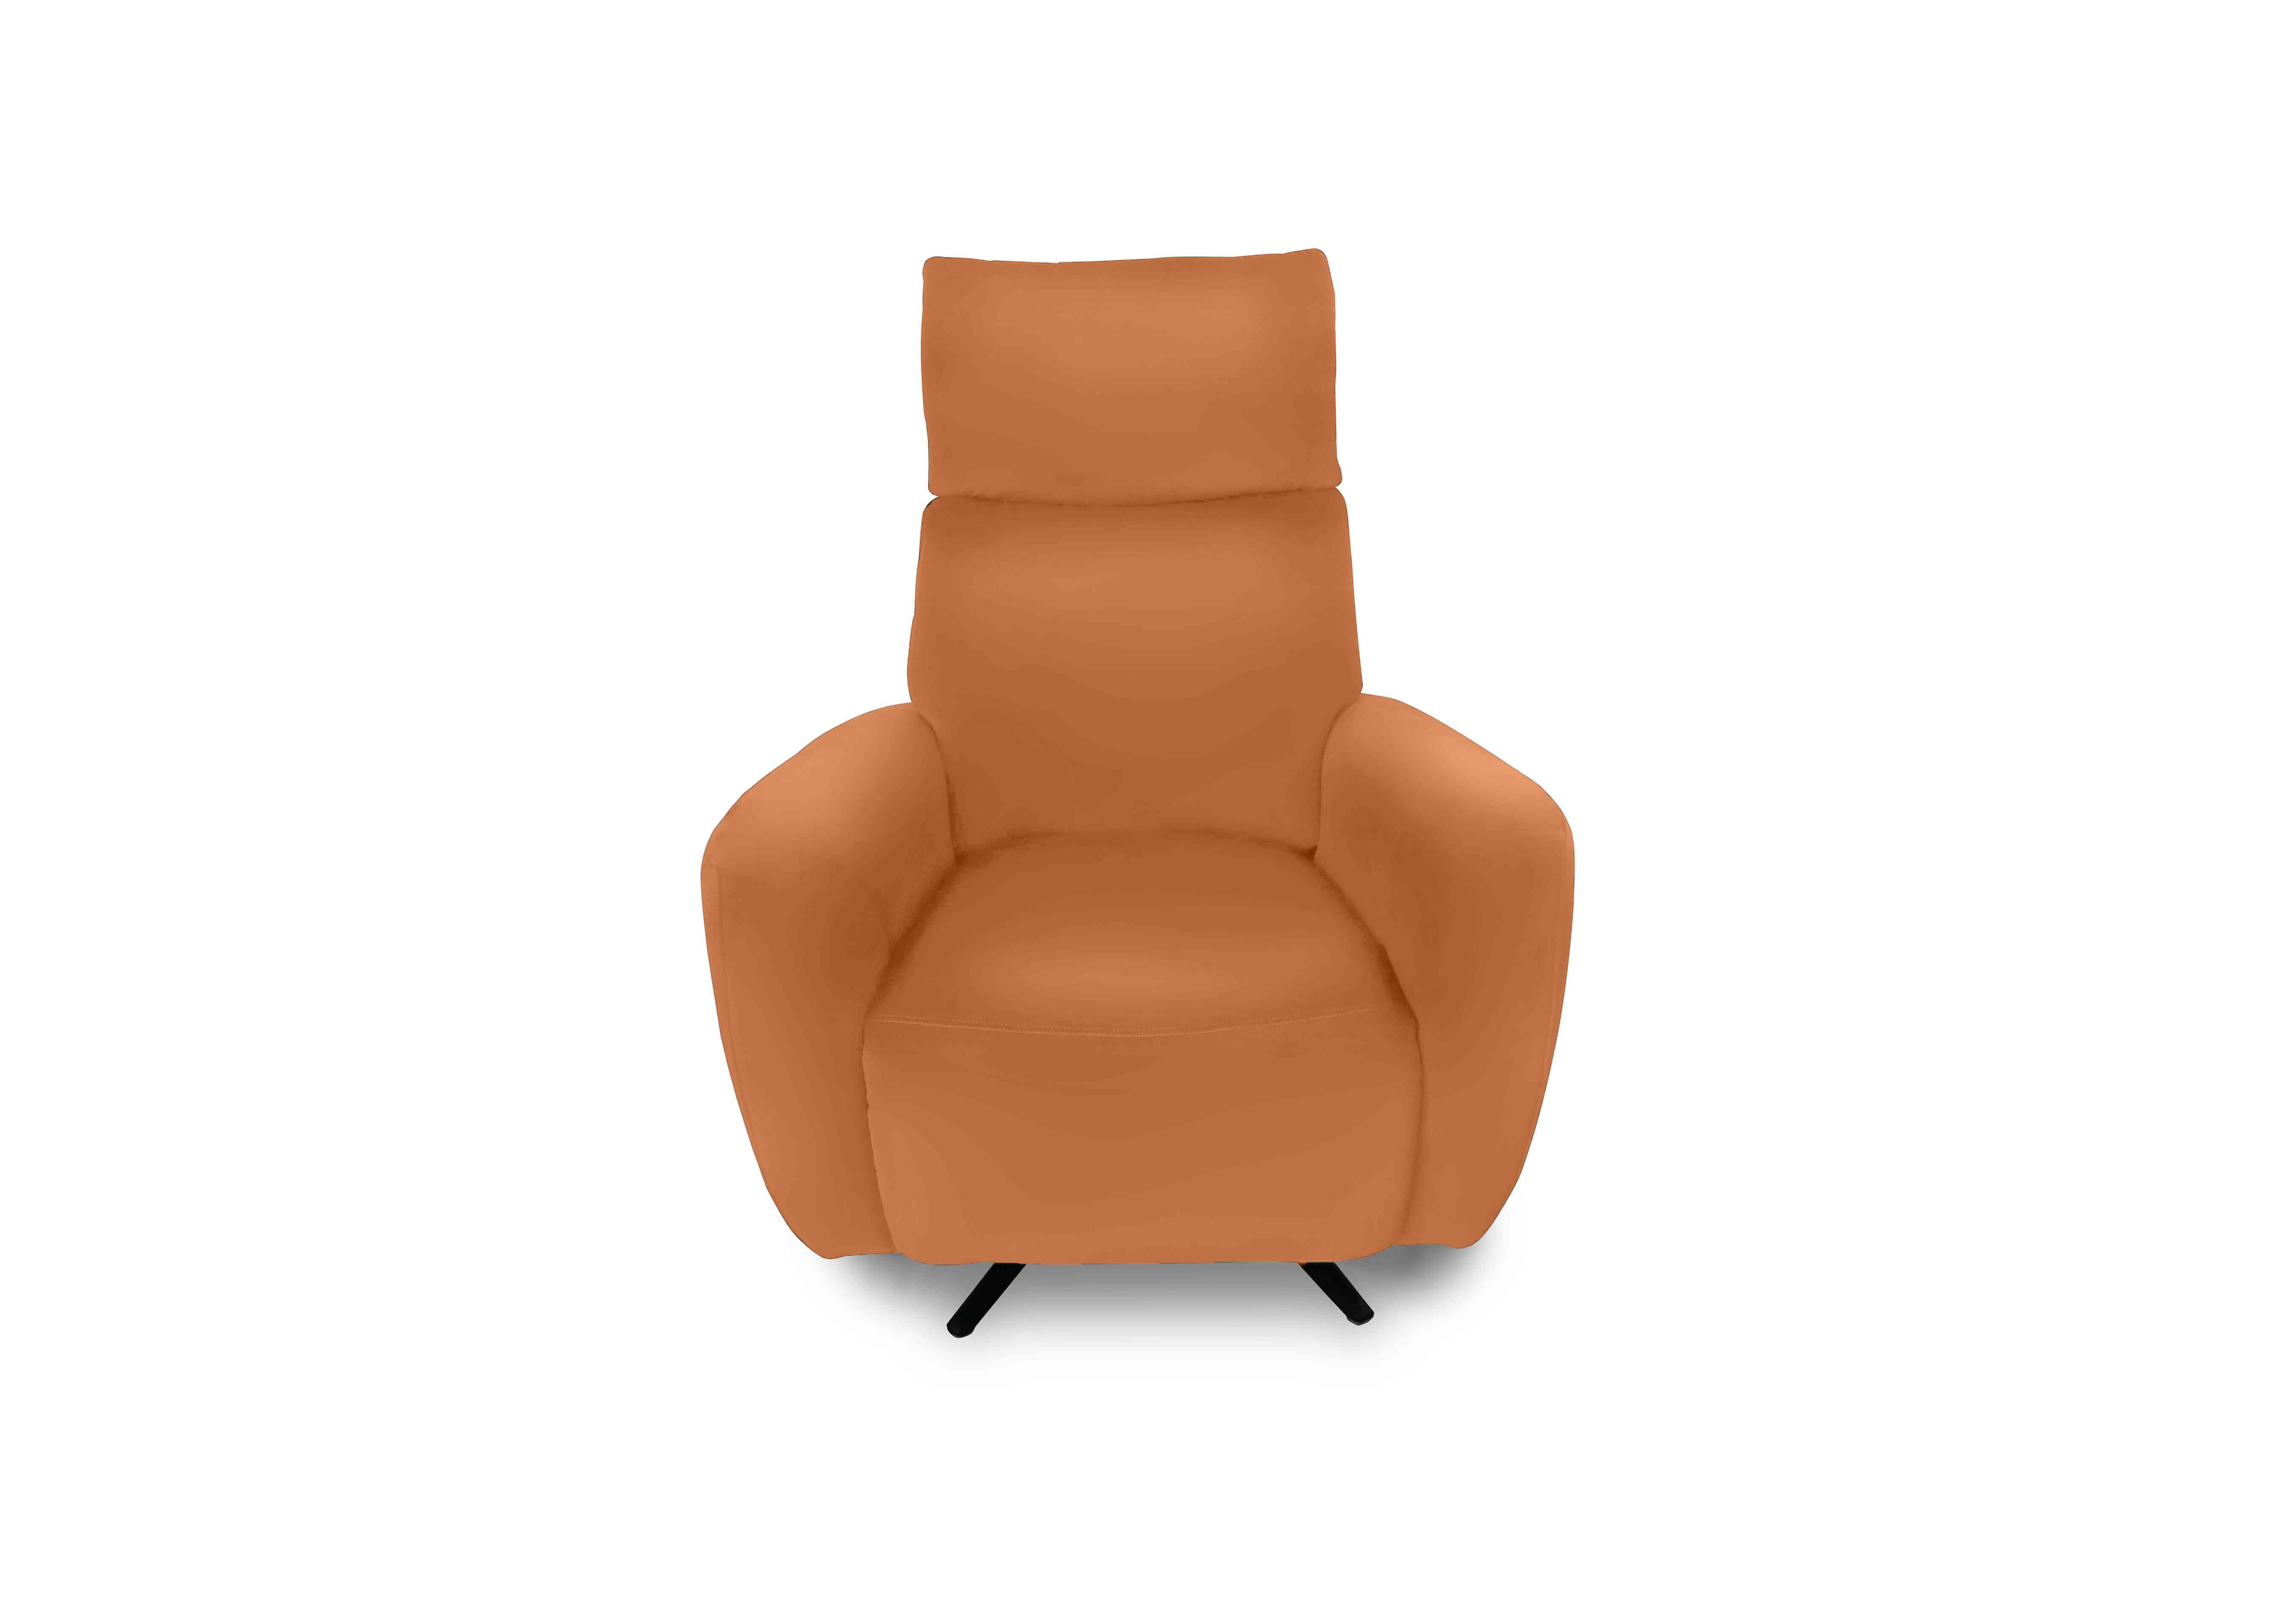 Designer Chair Collection Granada Leather Power Recliner Swivel Chair with Massage Feature in Bv-335e Honey Yellow on Furniture Village